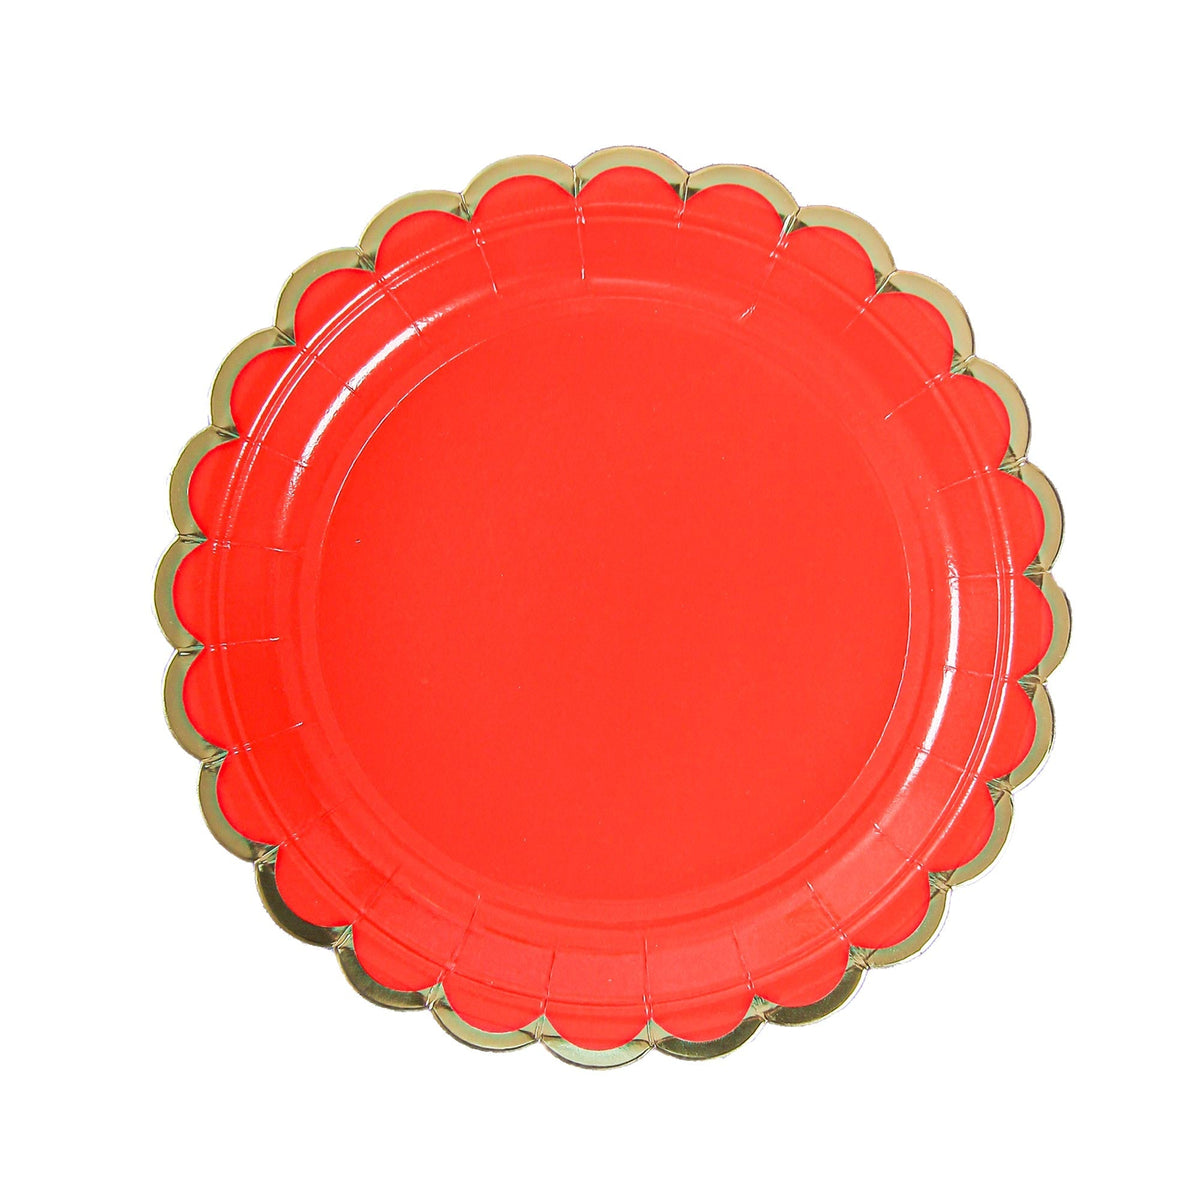 YIWU SANDY PAPER PRODUCTS CO., LTD Everyday Entertaining Red Flower Edge Small Dessert Paper Plates, 7 Inches, 8 Count